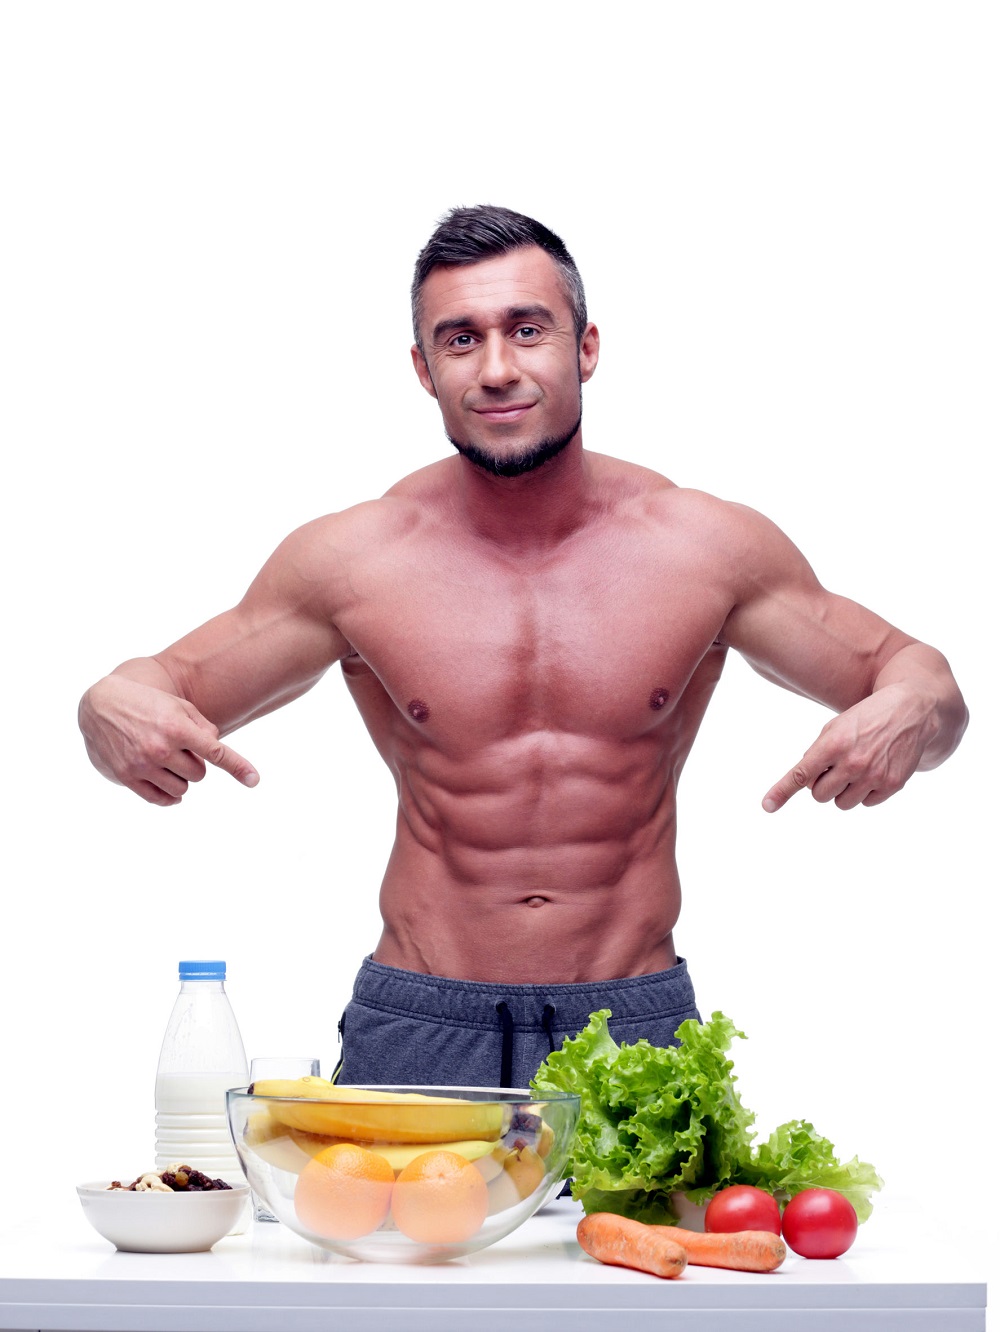 Athletes Nutrition 2 6 Main Testosterone Benefits For Athletic Performance - 7